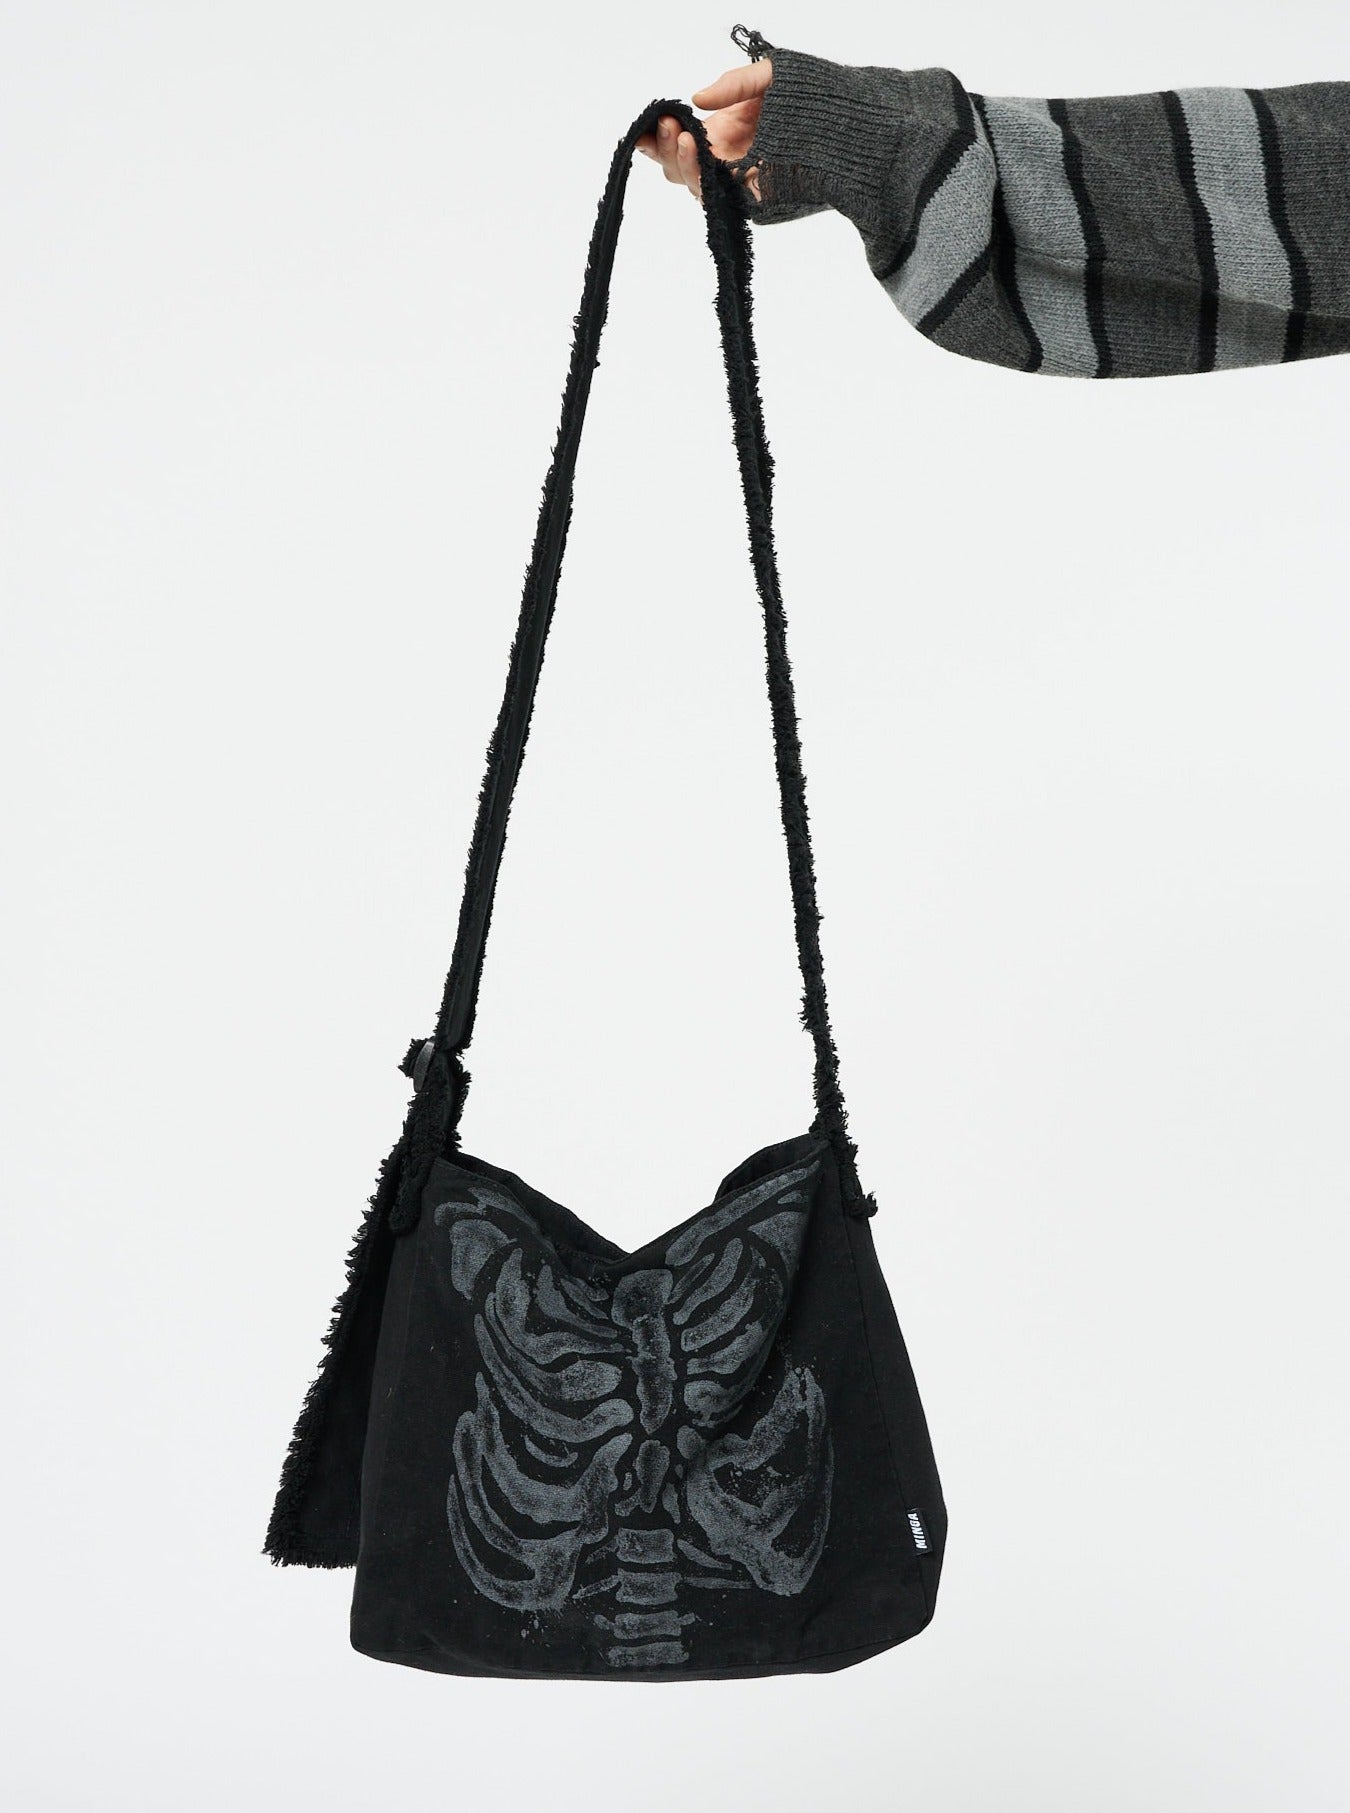 A shoulder strap bag with an X-ray skeleton design by Minga London. This unique bag features a striking and edgy print that adds a touch of alternative style to your outfit, making a bold statement wherever you go.